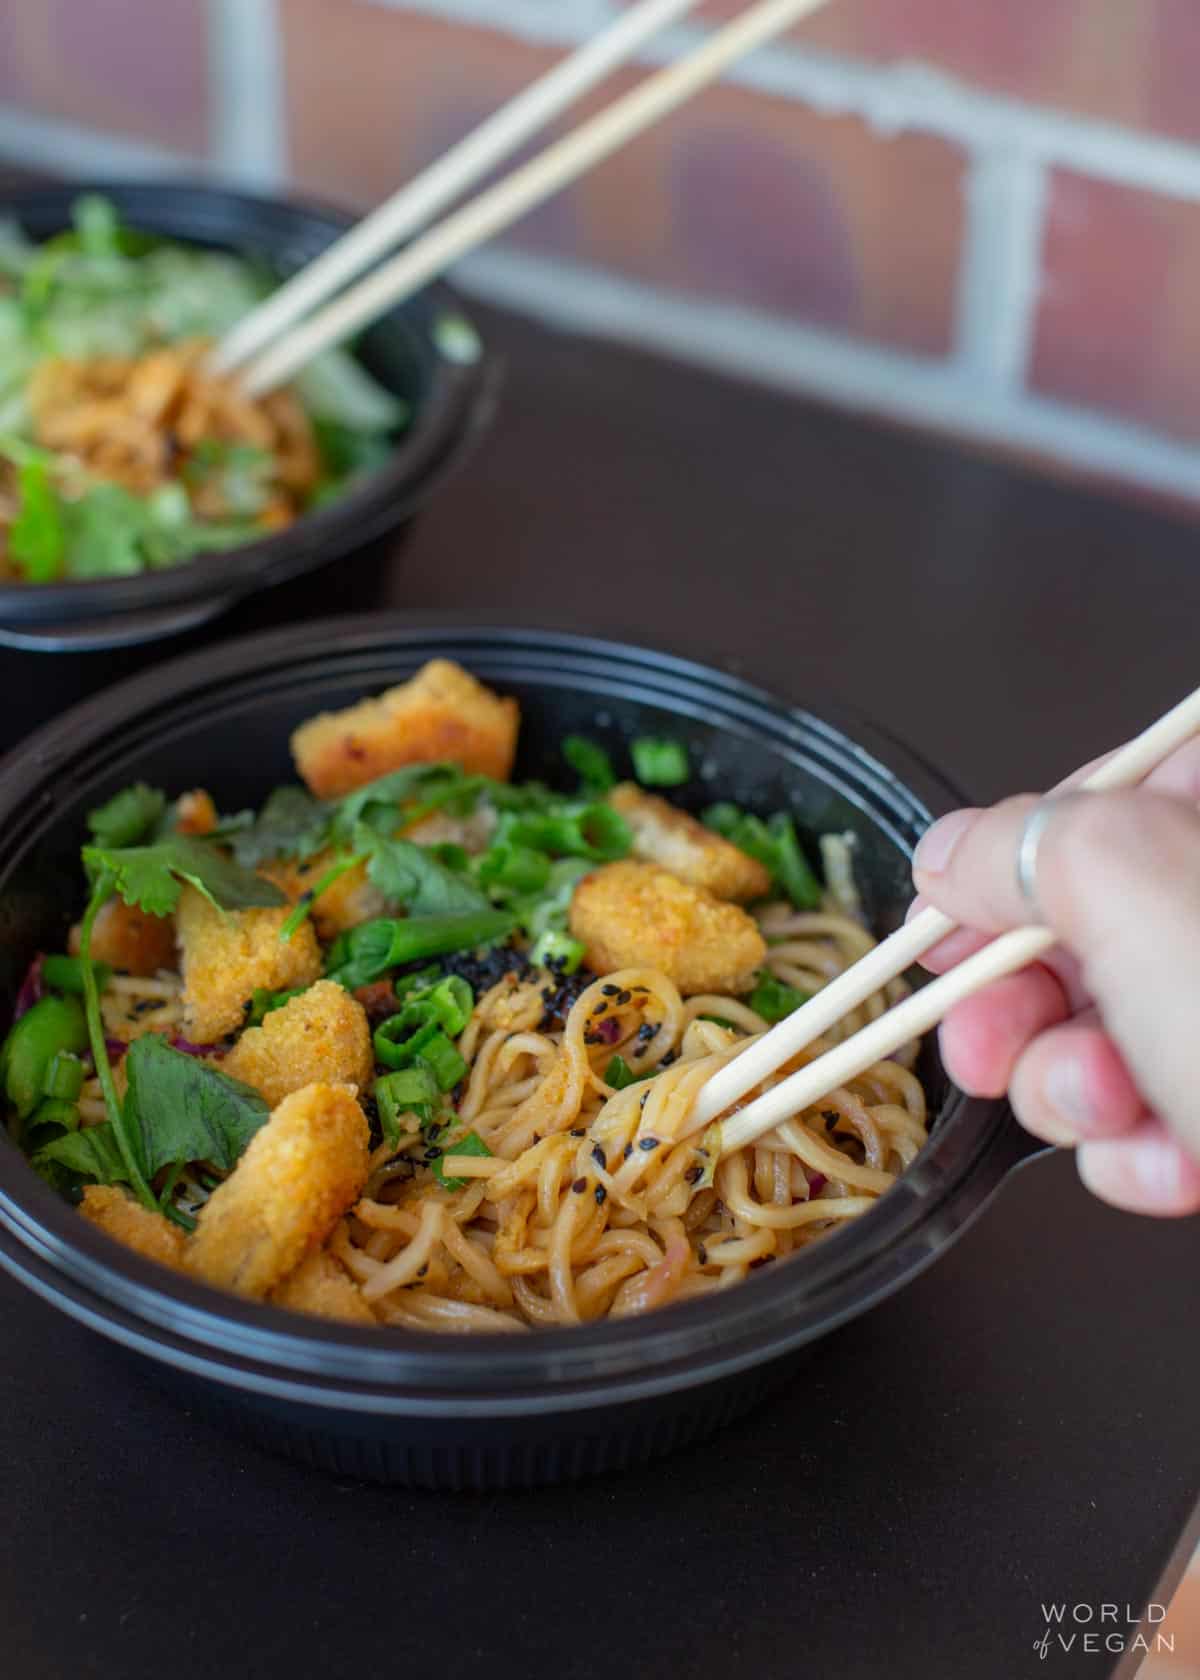 Take Out container of Spicy Korean Beef Noodles made vegan at Noodles and Company